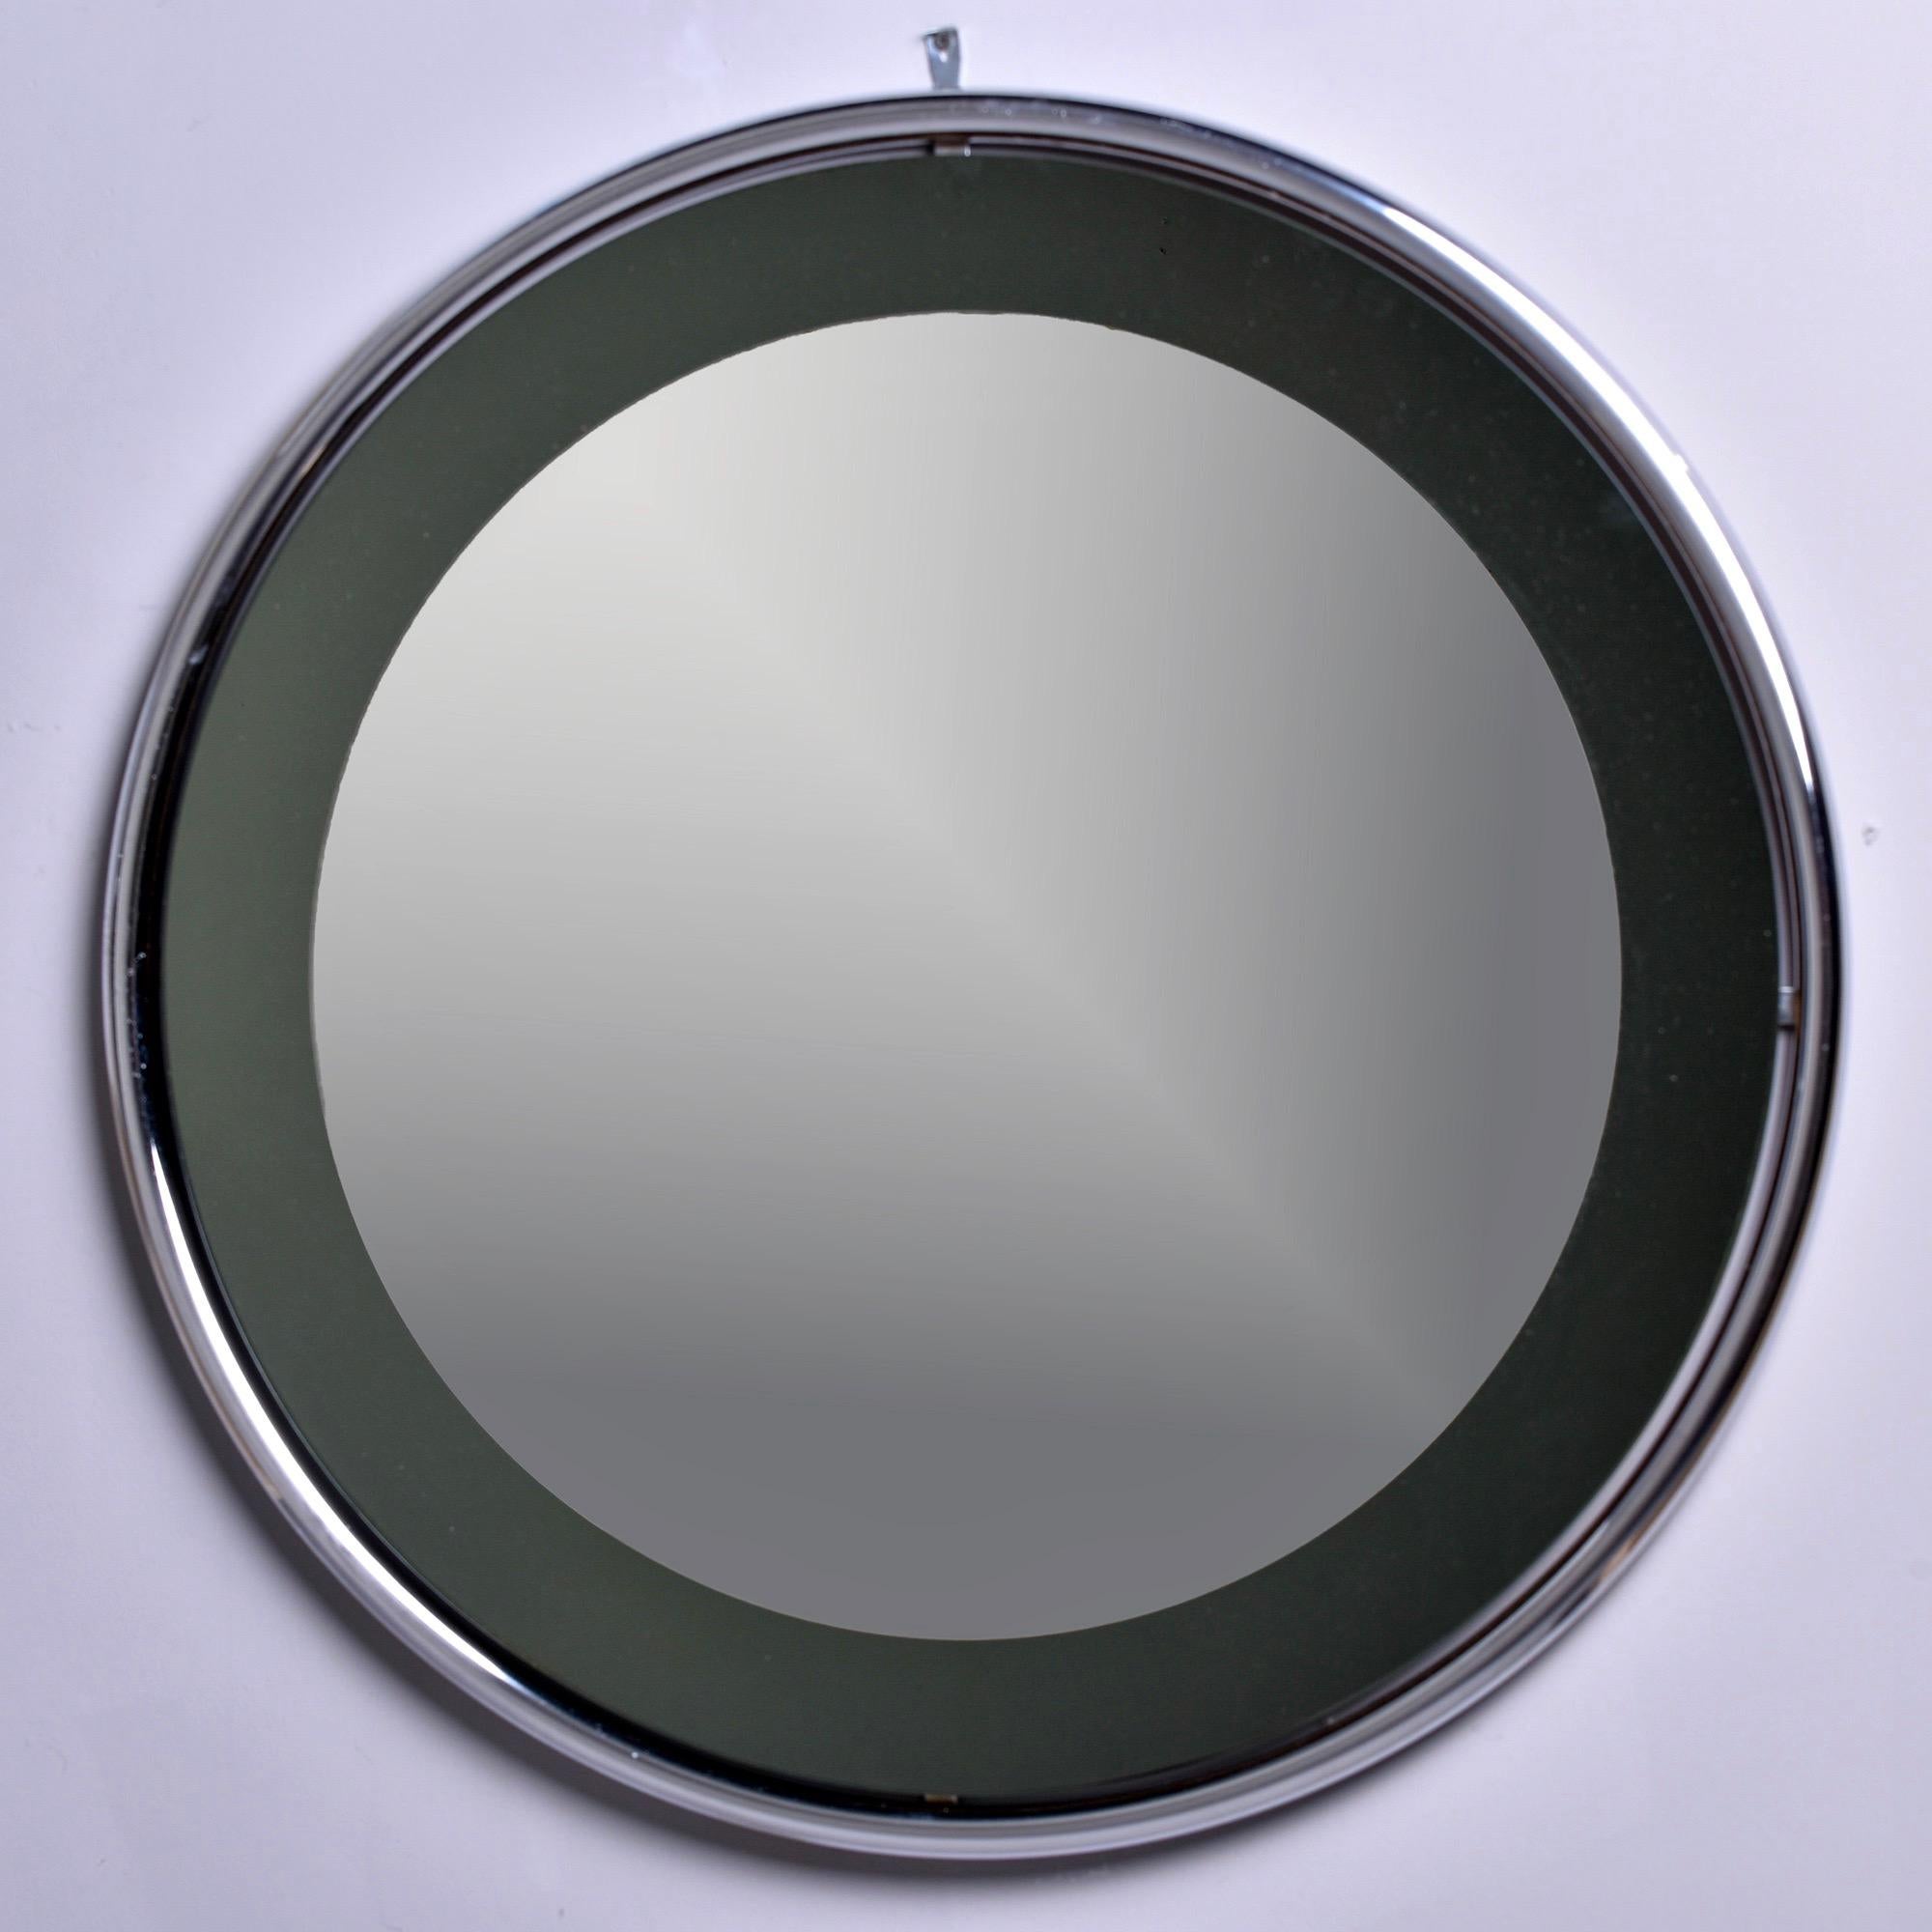 Circa 1960s mirror attributed to Italian maker Cristal Arte features a round, floating style chrome frame and smoke colored glass with a round mirror overlay. 

Very good overall vintage condition with minor scattered wear to chrome and some small